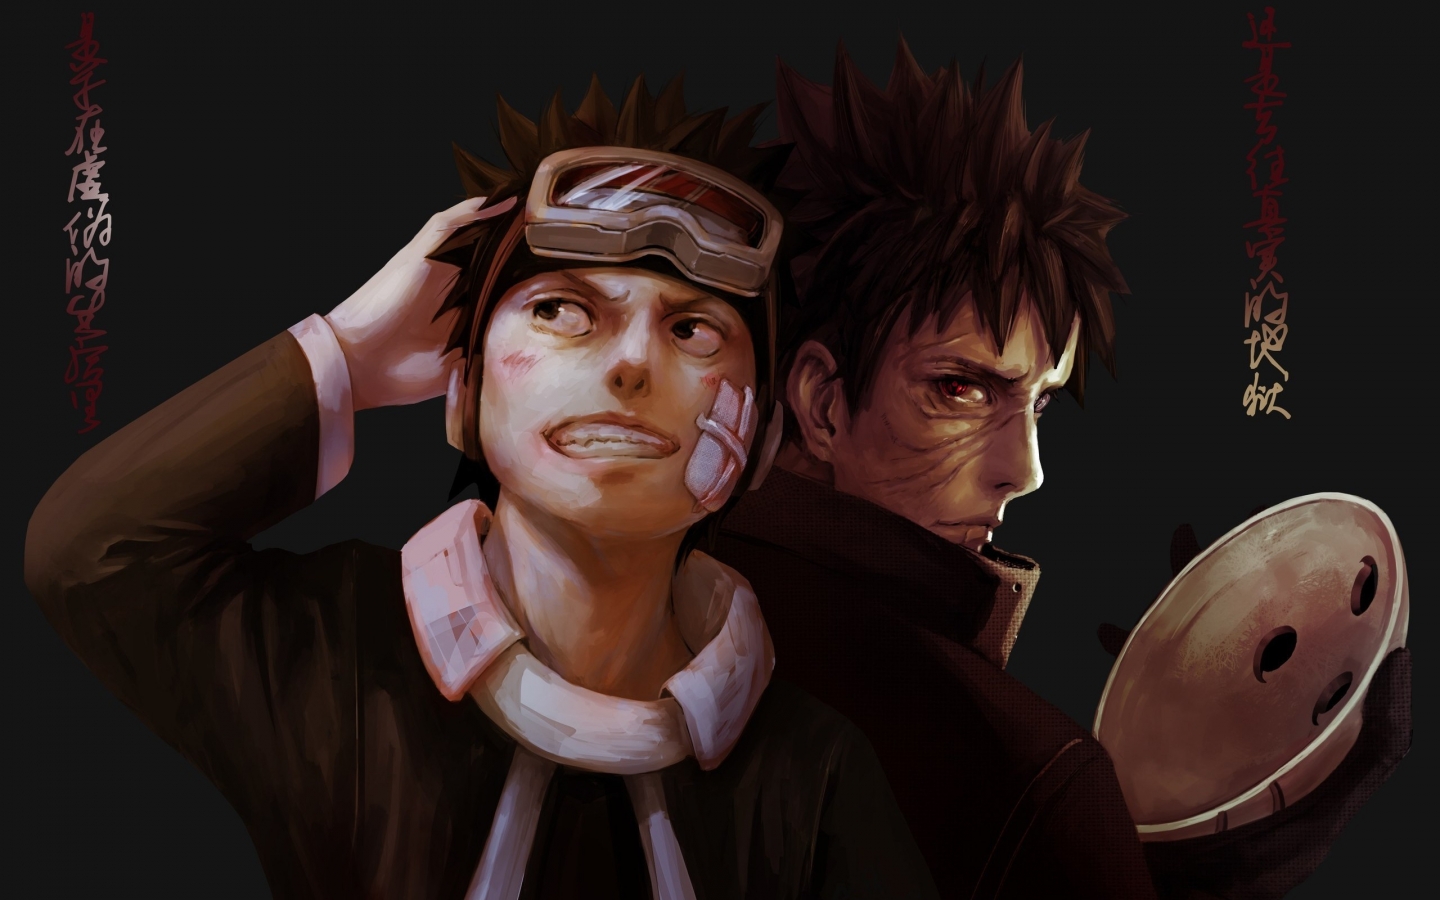 Naruto Style for 1440 x 900 widescreen resolution